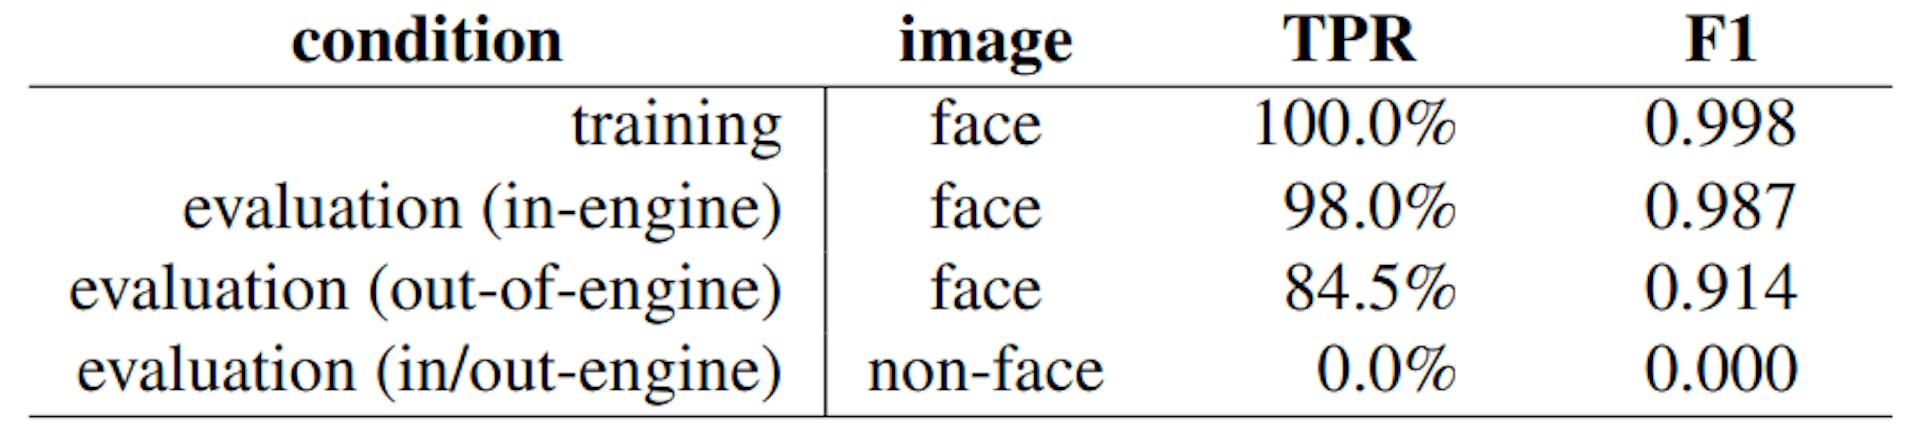 Table 2. Baseline training and evaluation true positive (correctly classifying an AI-generated image, averaged across all synthesis engines (TPR)). In each condition, the false positive rate is 0.5% (incorrectly classifying a real face (FPR)). Also reported is the F1 score defined as 2TP/(2TP + FP + FN). TP, FP, and FN represent the number of true positives, false positives, and false negatives, respectively. In-engine/out-of-engine indicates that the images were created with the same/different synthesis engines as those used in training.